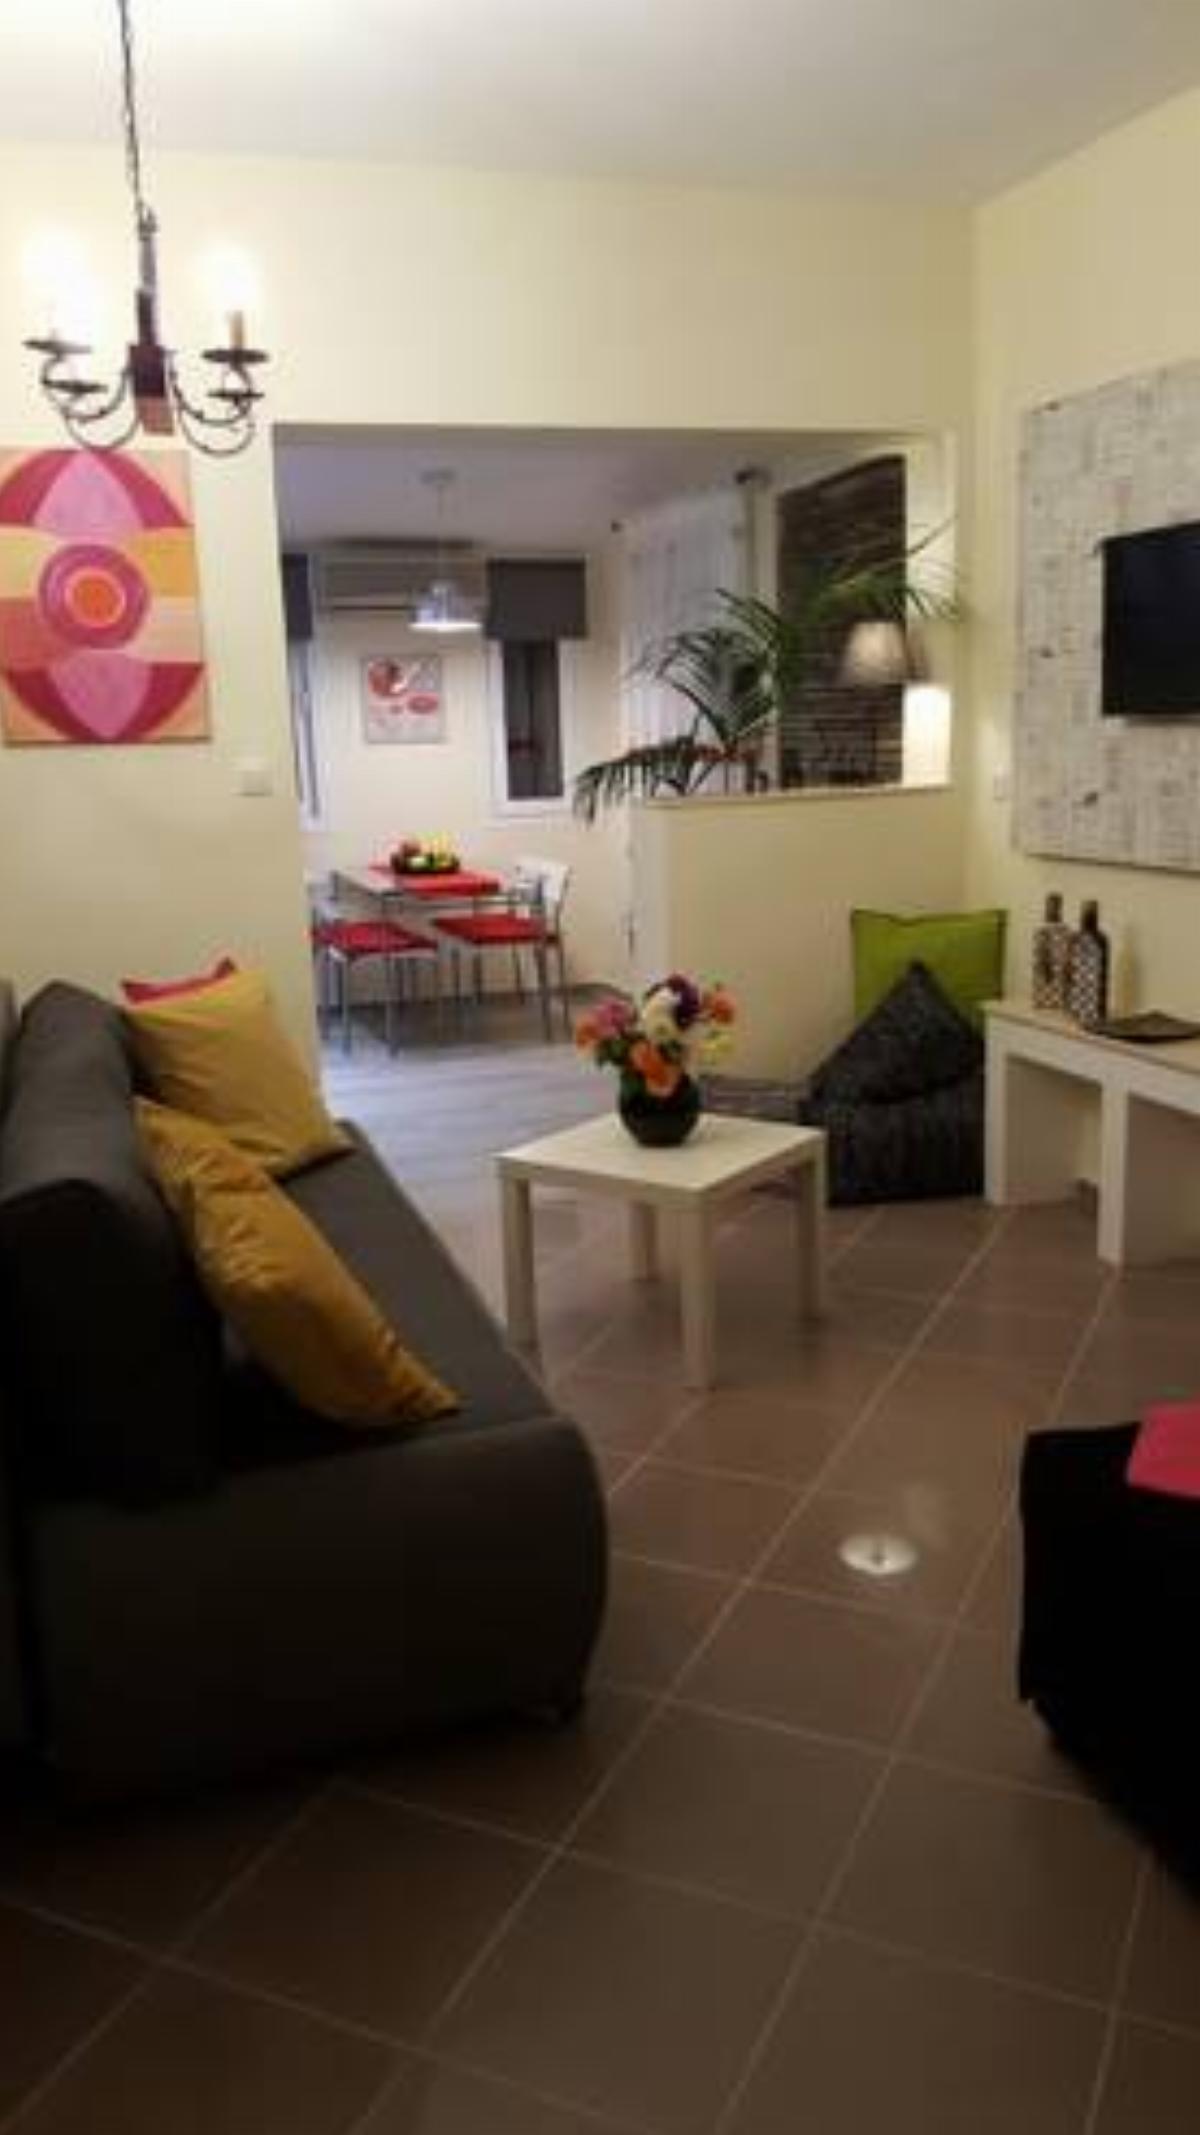 City Space Apartments Hotel Giannitsa Greece